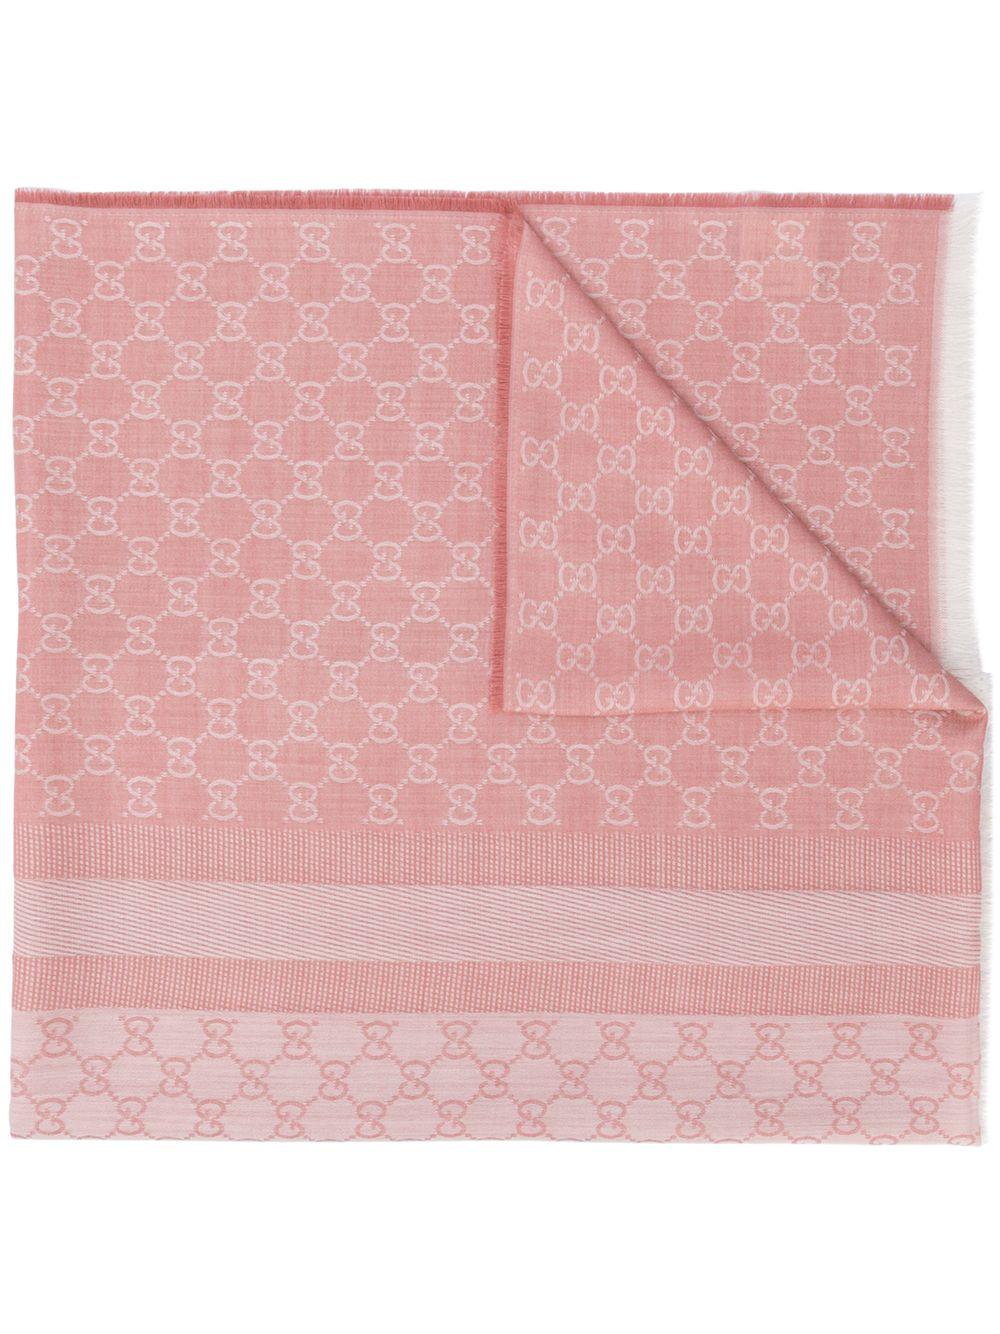 Crafted in Italy from an intricate blend of wool and silk in a neutral palette of powder pink and cream, this monogram print scarf from Gucci features an all-over GG print design and fringed edges.

Colour: Powder Pink

Composition: 80% Wool, 20%